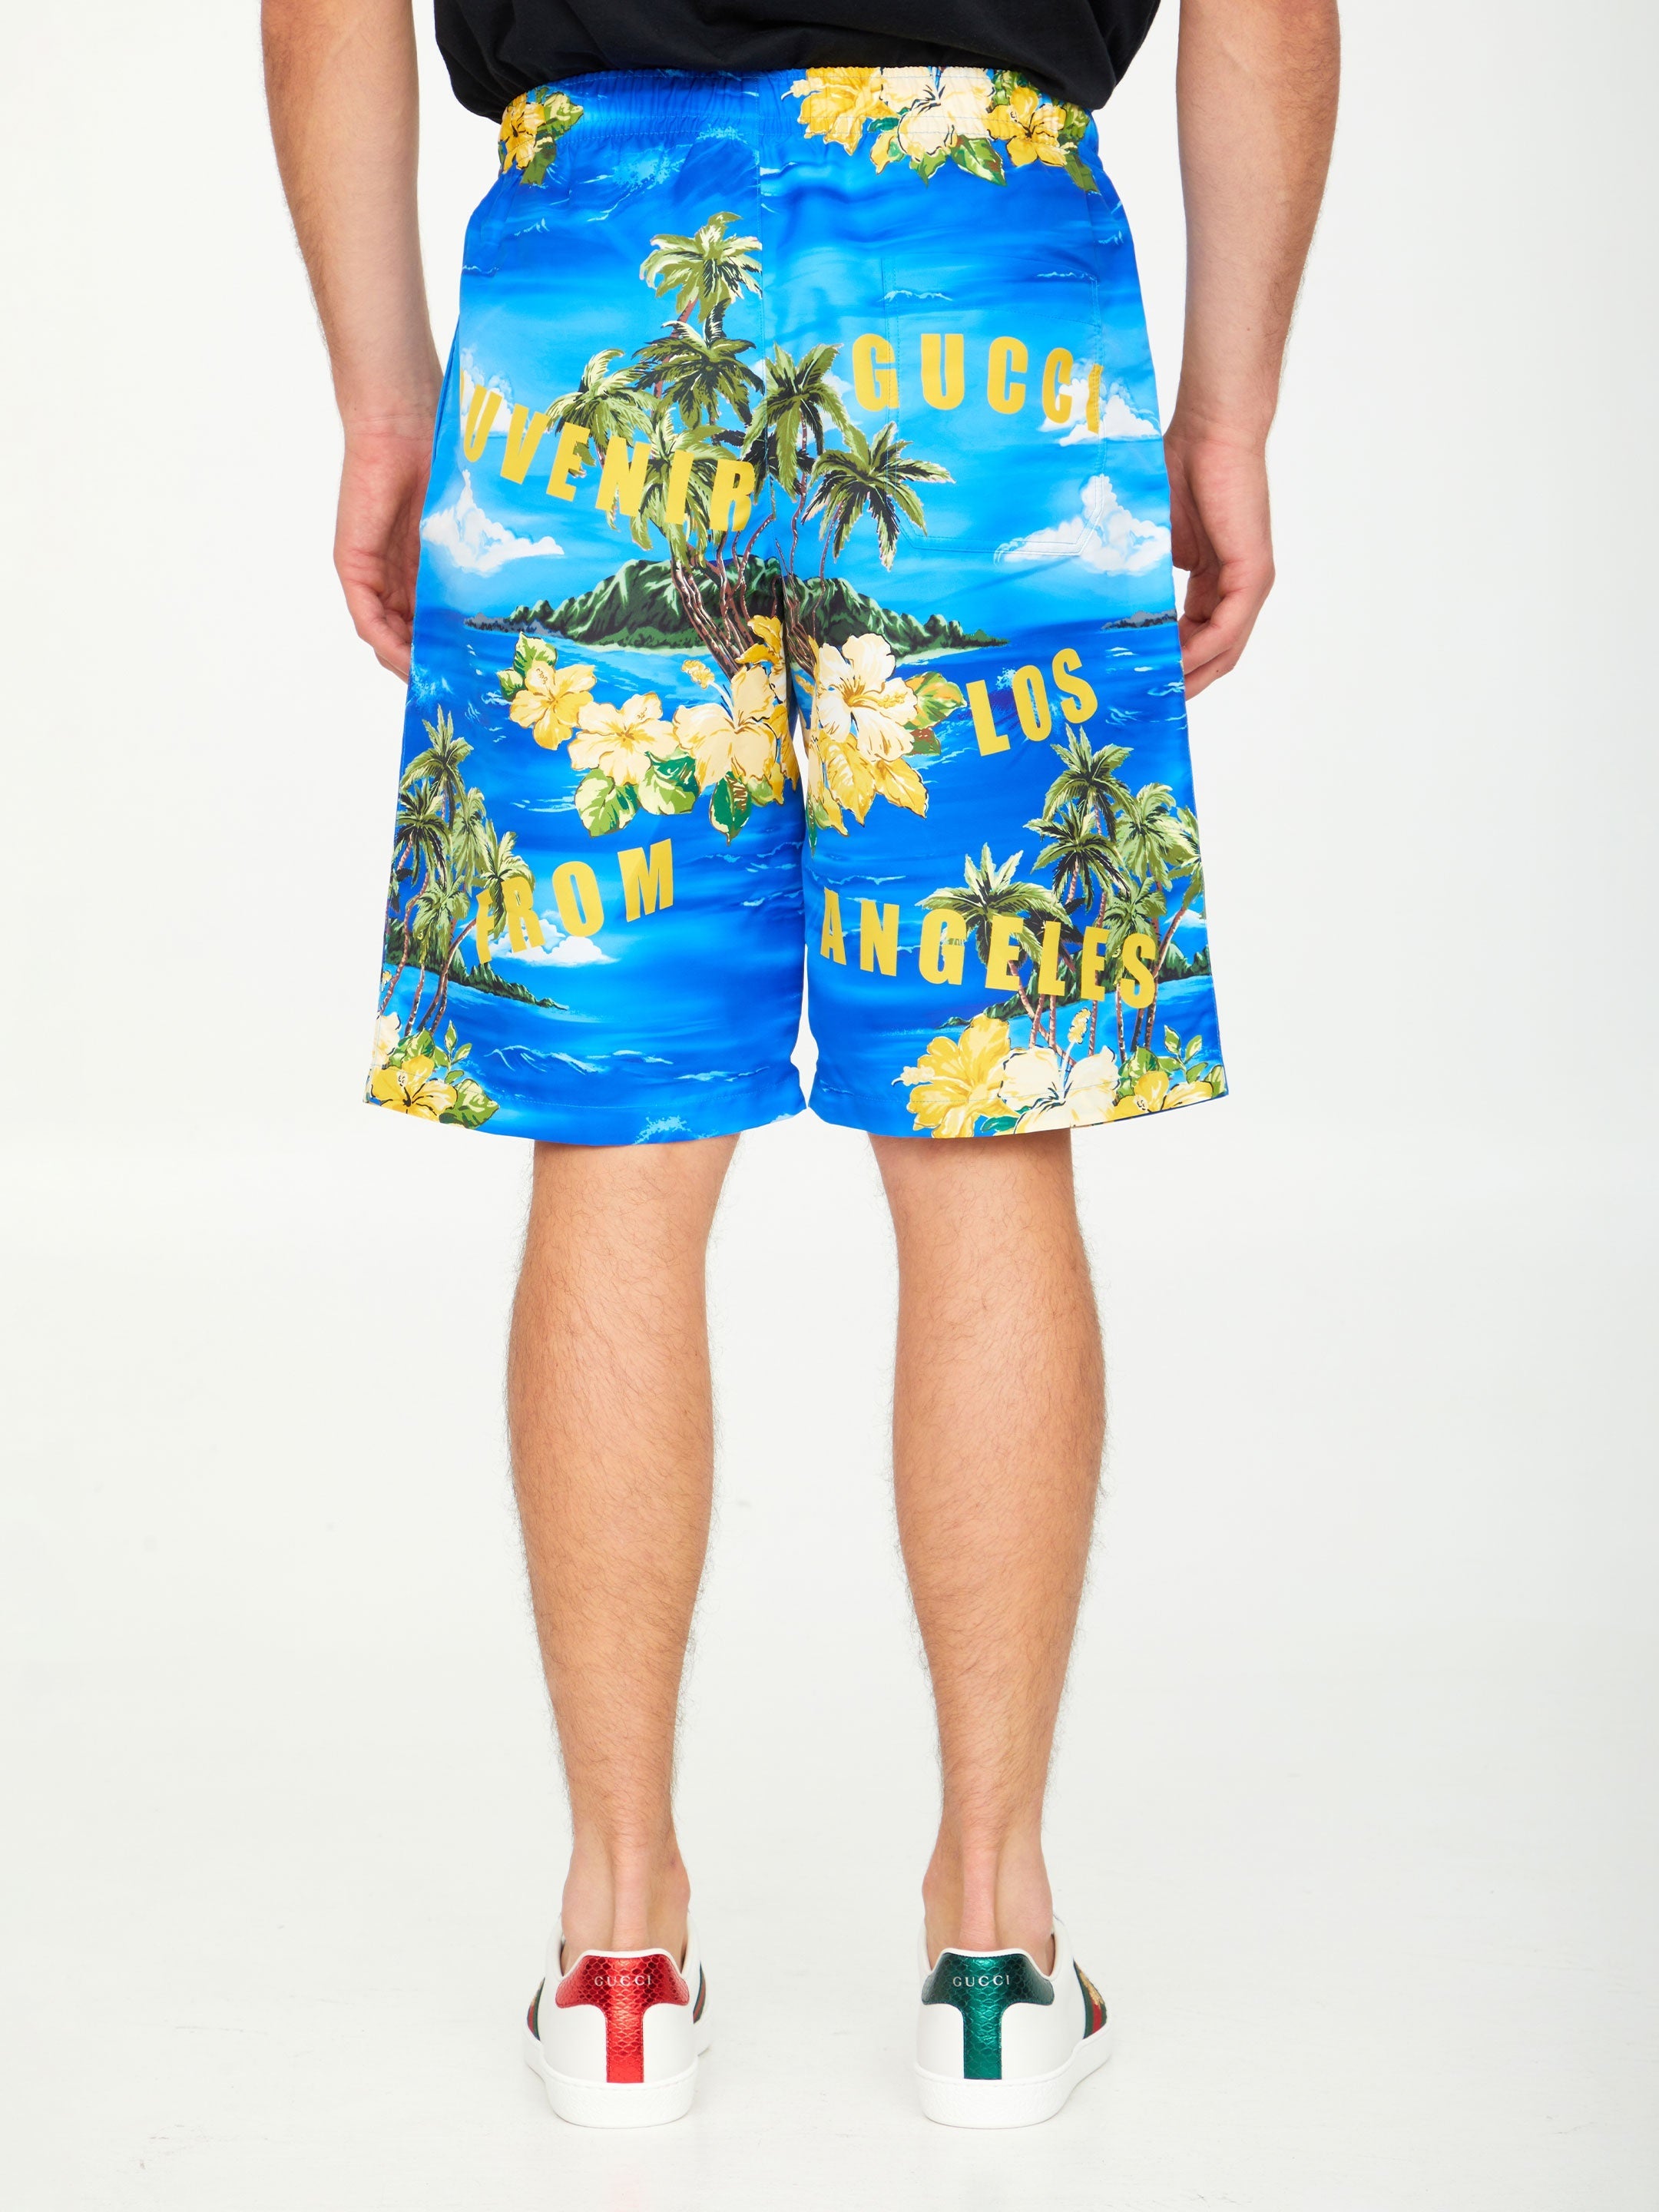 GUCCI-OUTLET-SALE-Printed-nylon-swim-shorts-Hosen-48-BLUE-ARCHIVE-COLLECTION-4.jpg